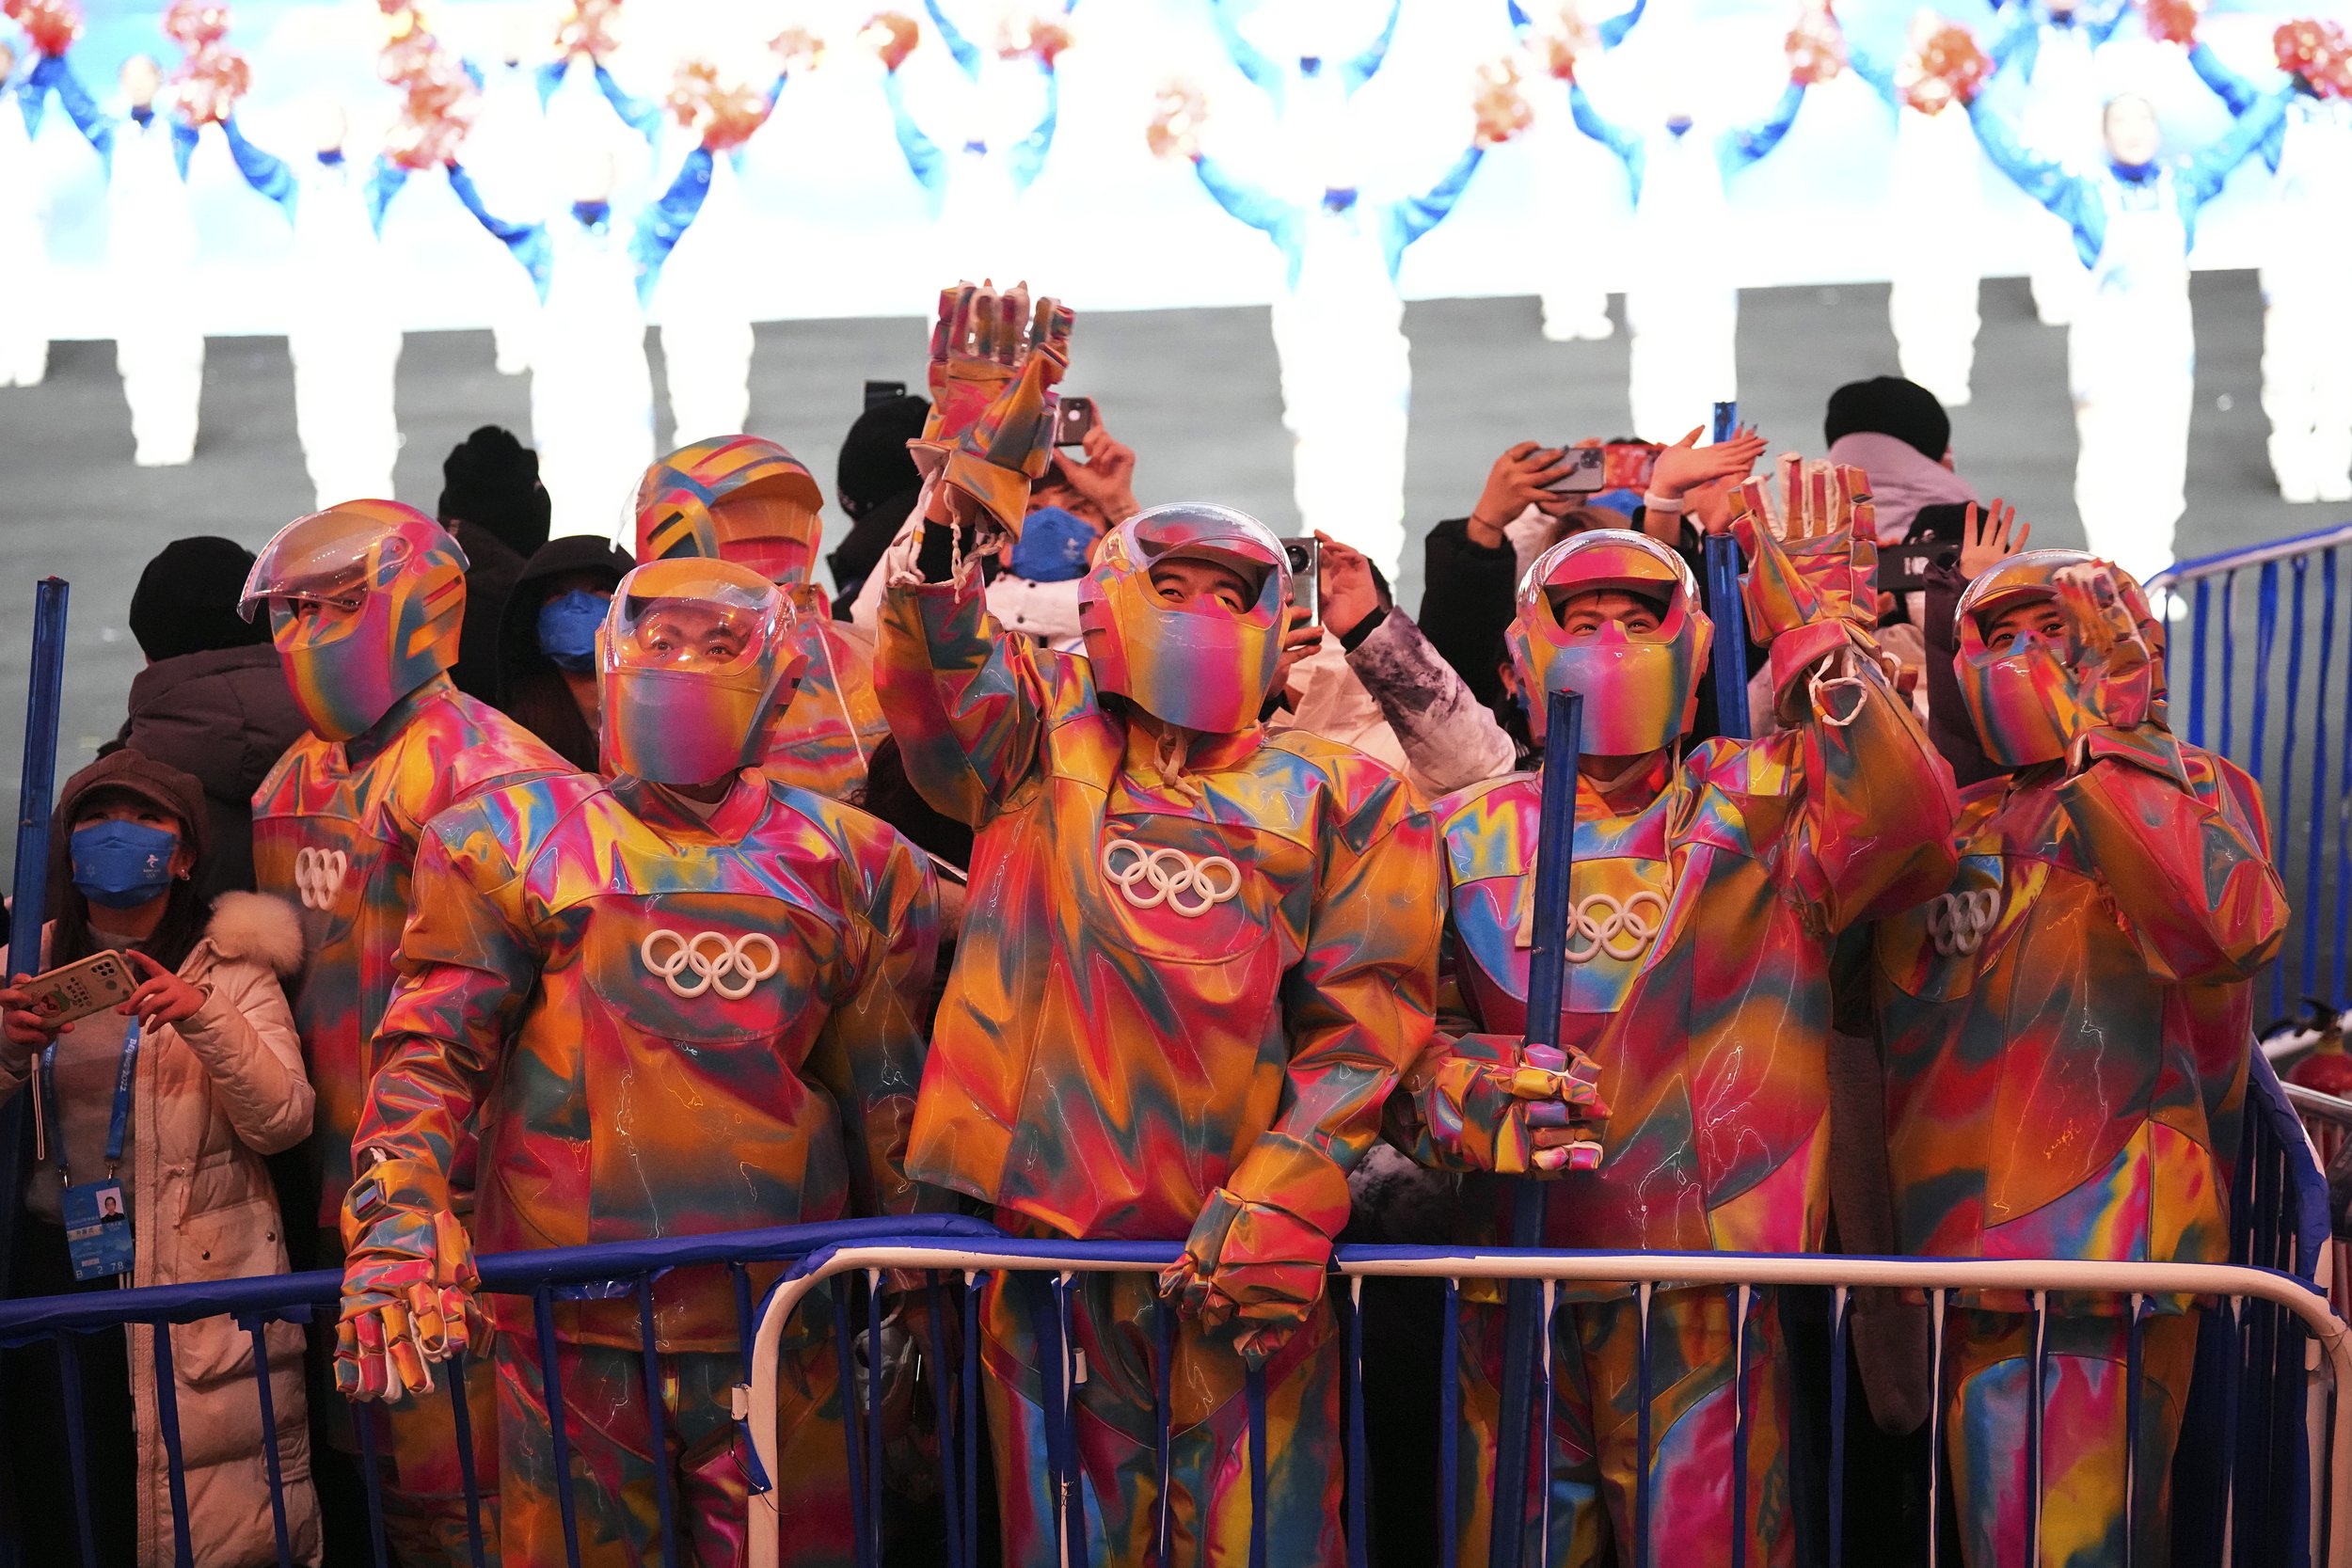  Actors cheer as President China, Xi Jinping, arrives for the opening ceremony of the 2022 Winter Olympics, Friday, Feb. 4, 2022, in Beijing. (AP Photo/David J. Phillip) 